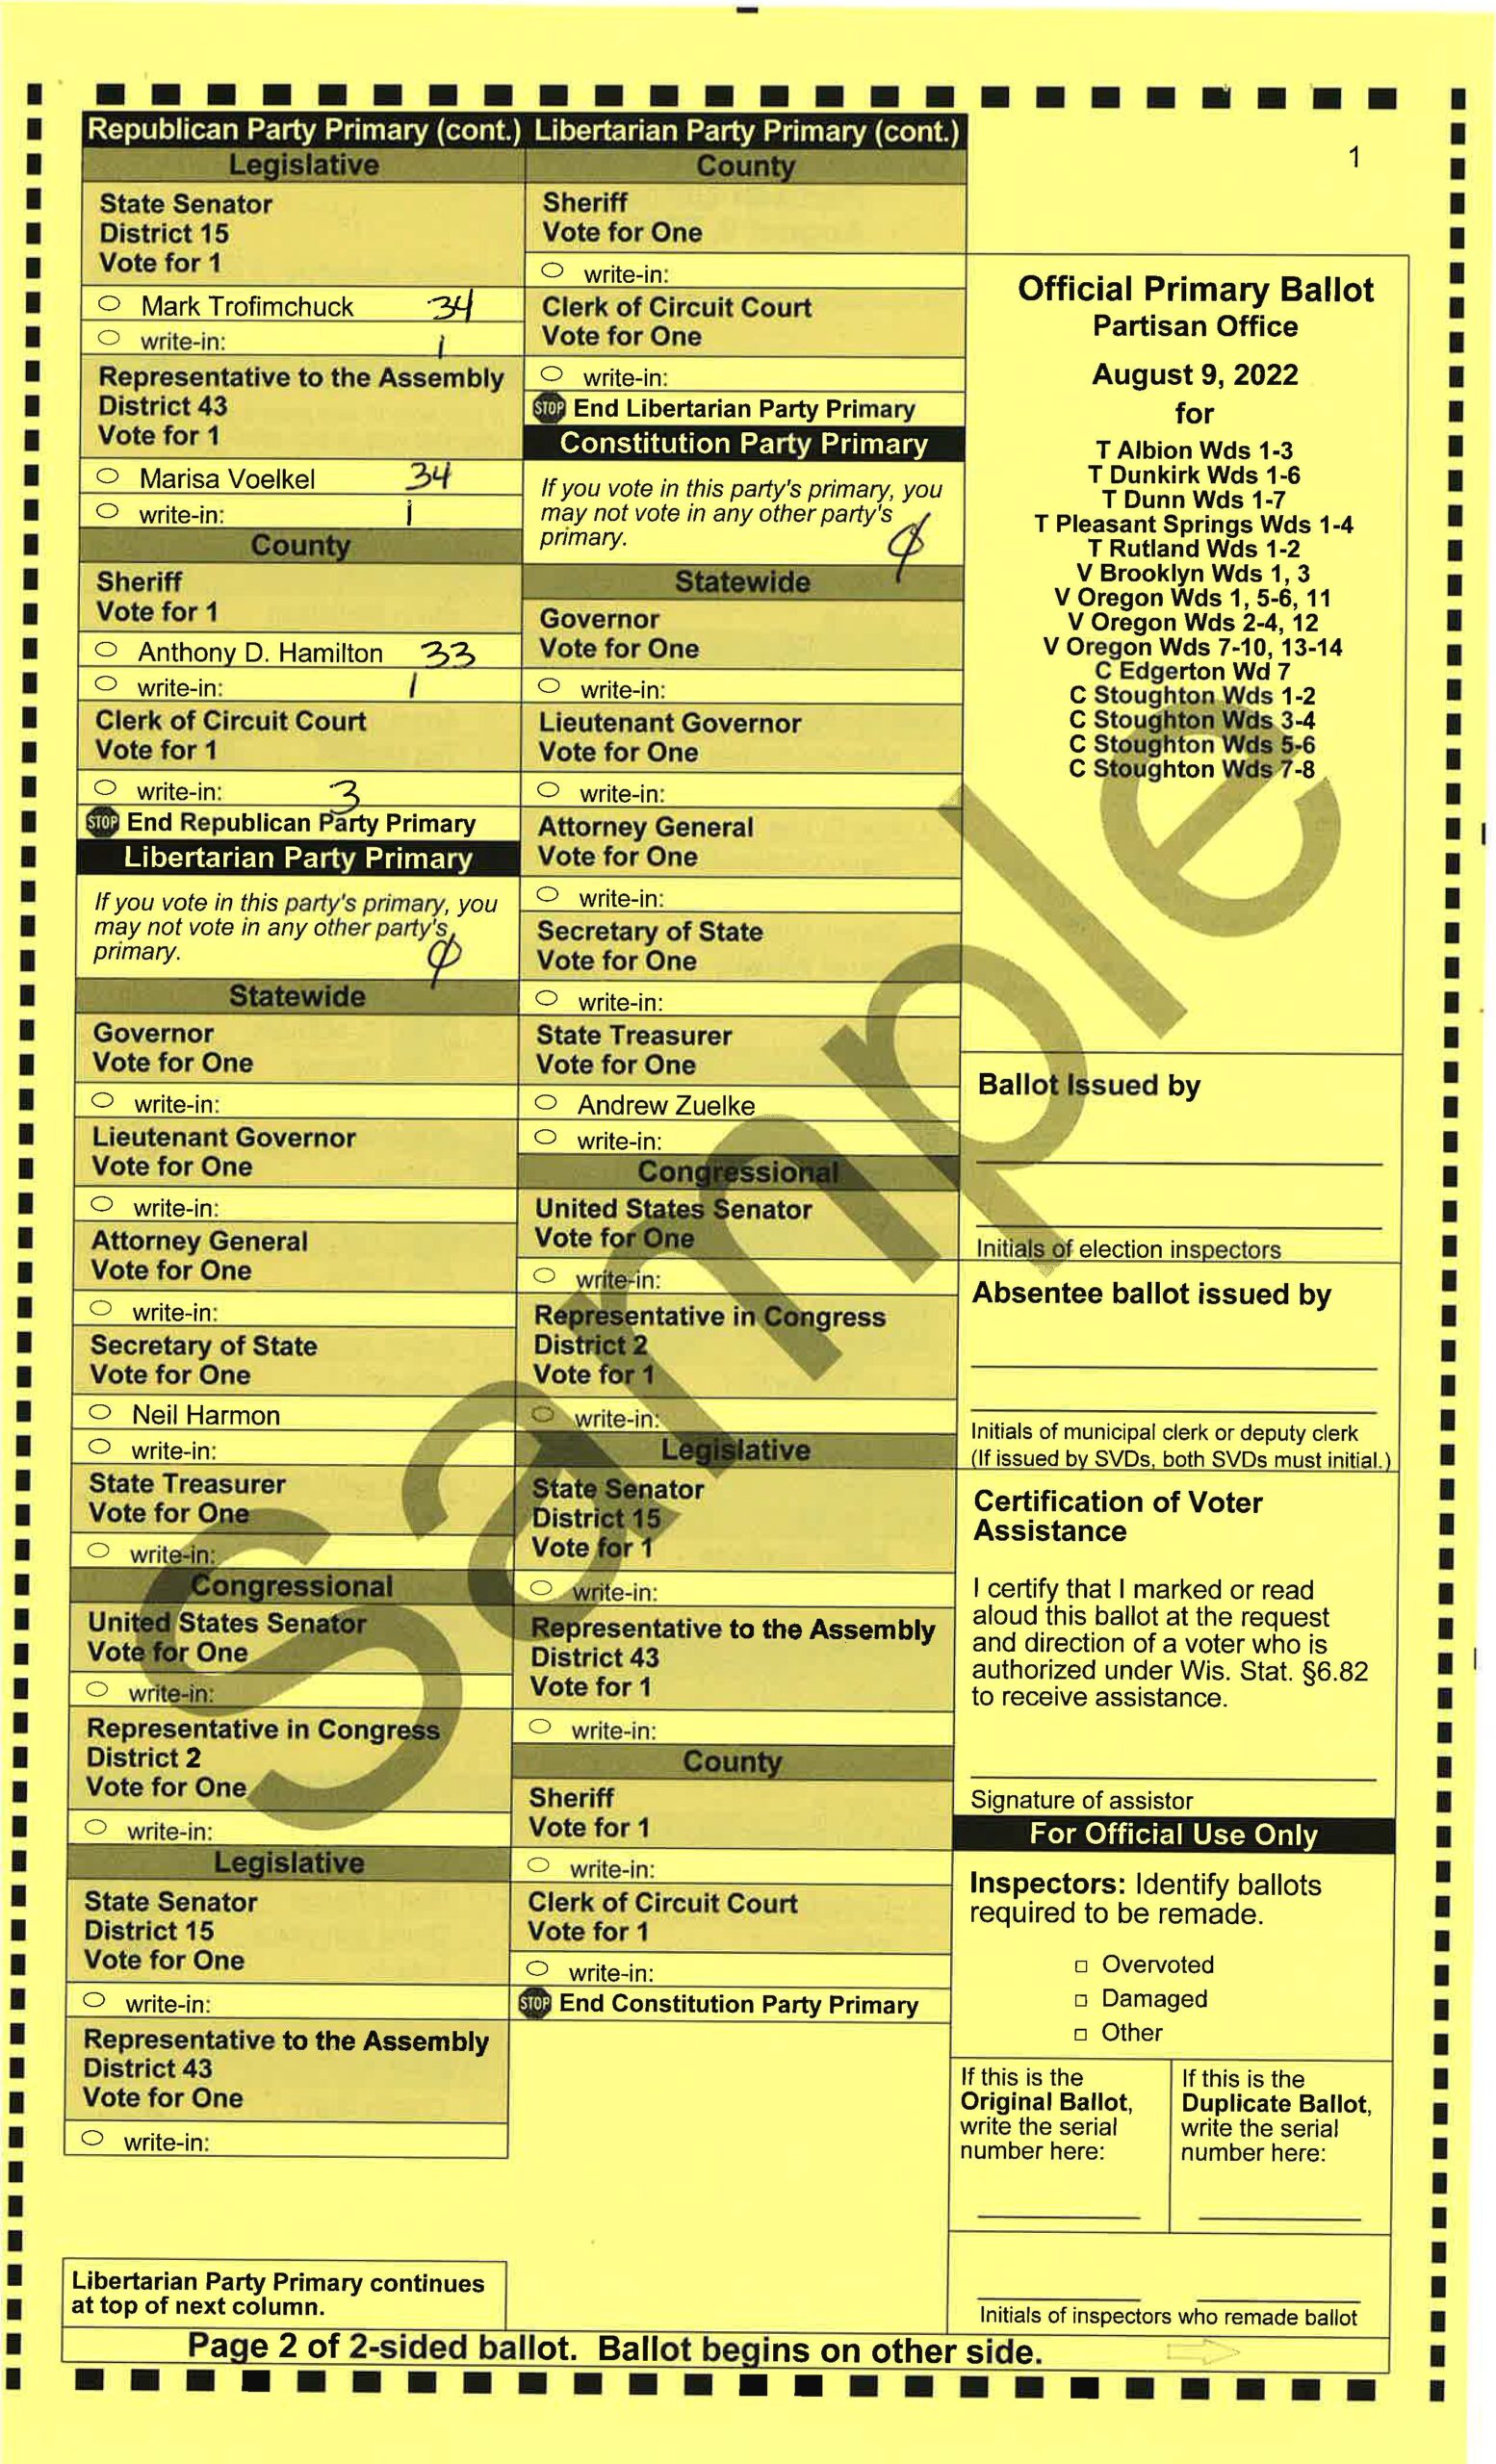 Dane County results page 2